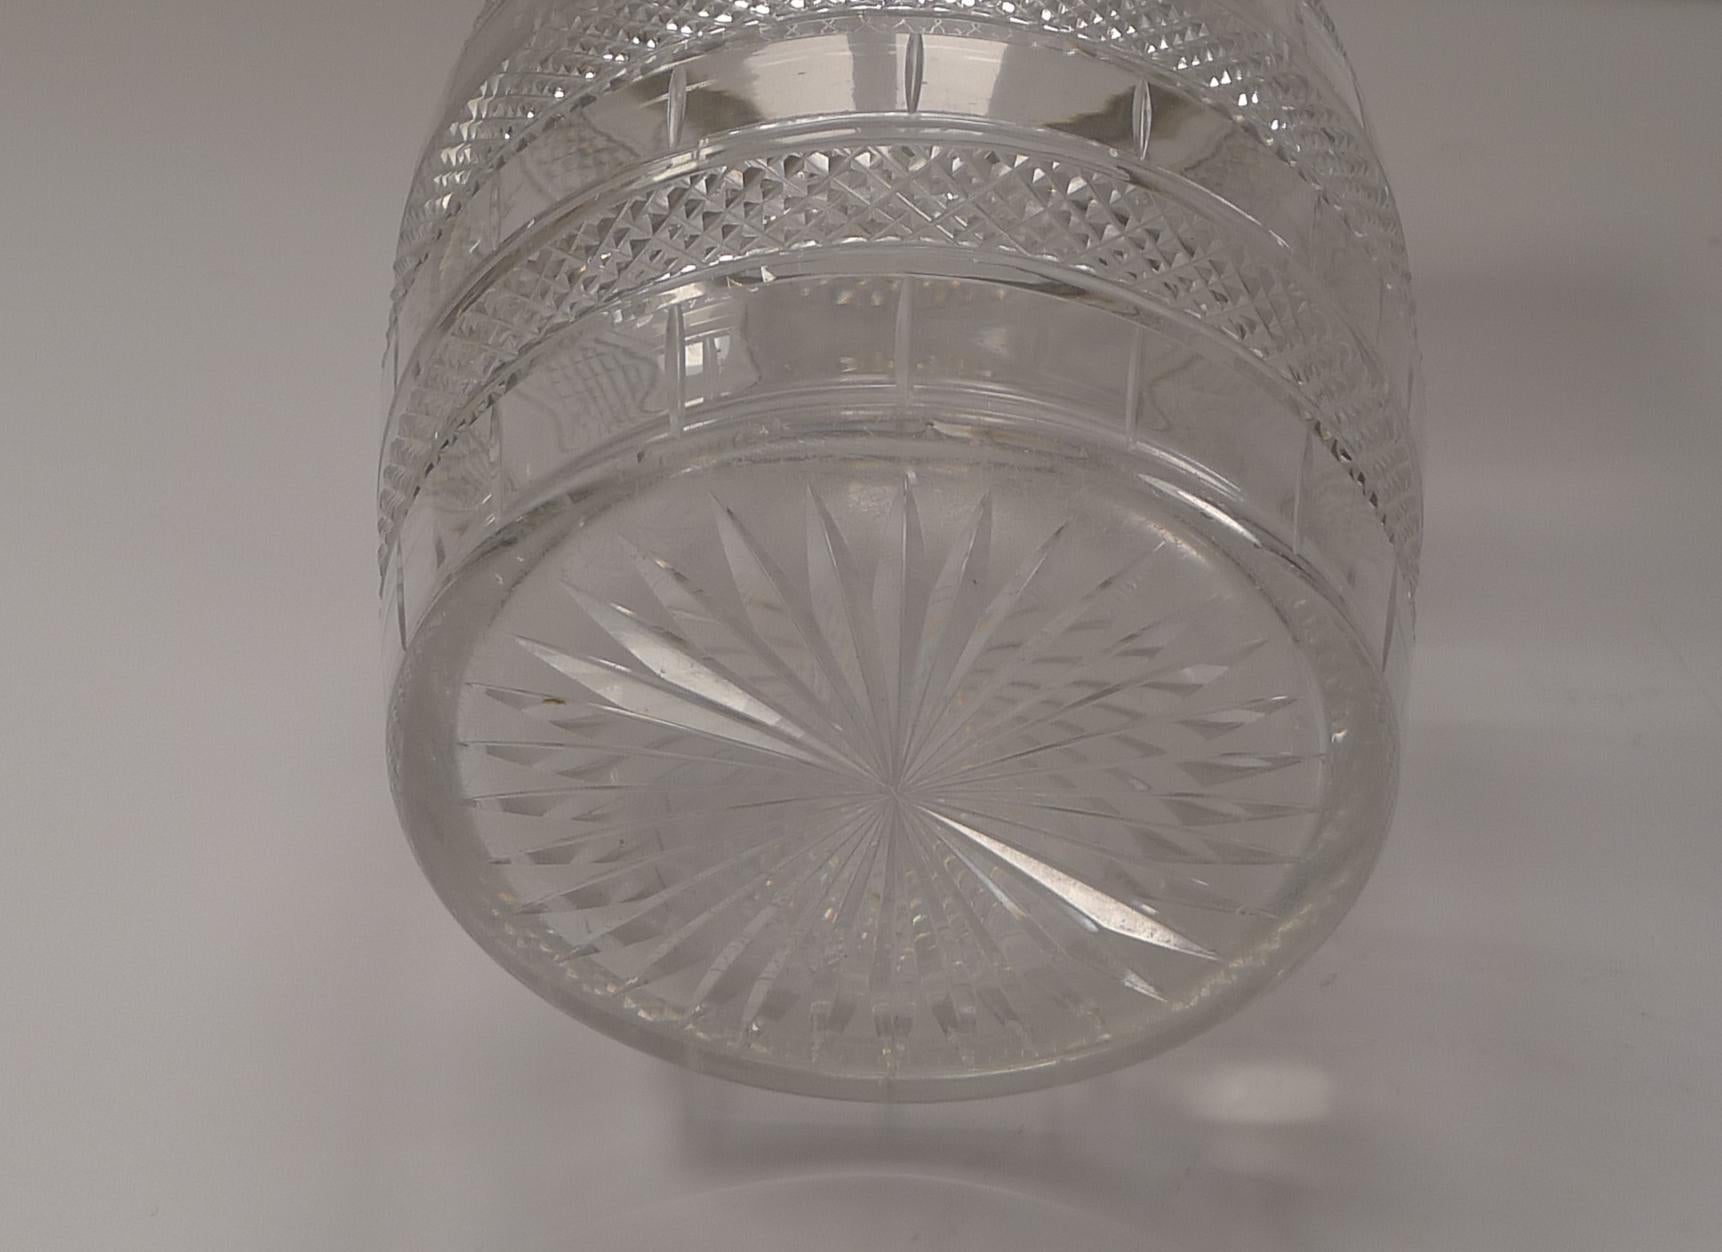 A particularly good and unusual cut glass biscuit box which would equally make a wonderful ice bucket or pail.

Earlier than most of this type, it dates to around 1860, mid-Victorian in era. The glass is beautifully hand-cut to emulate a coopered